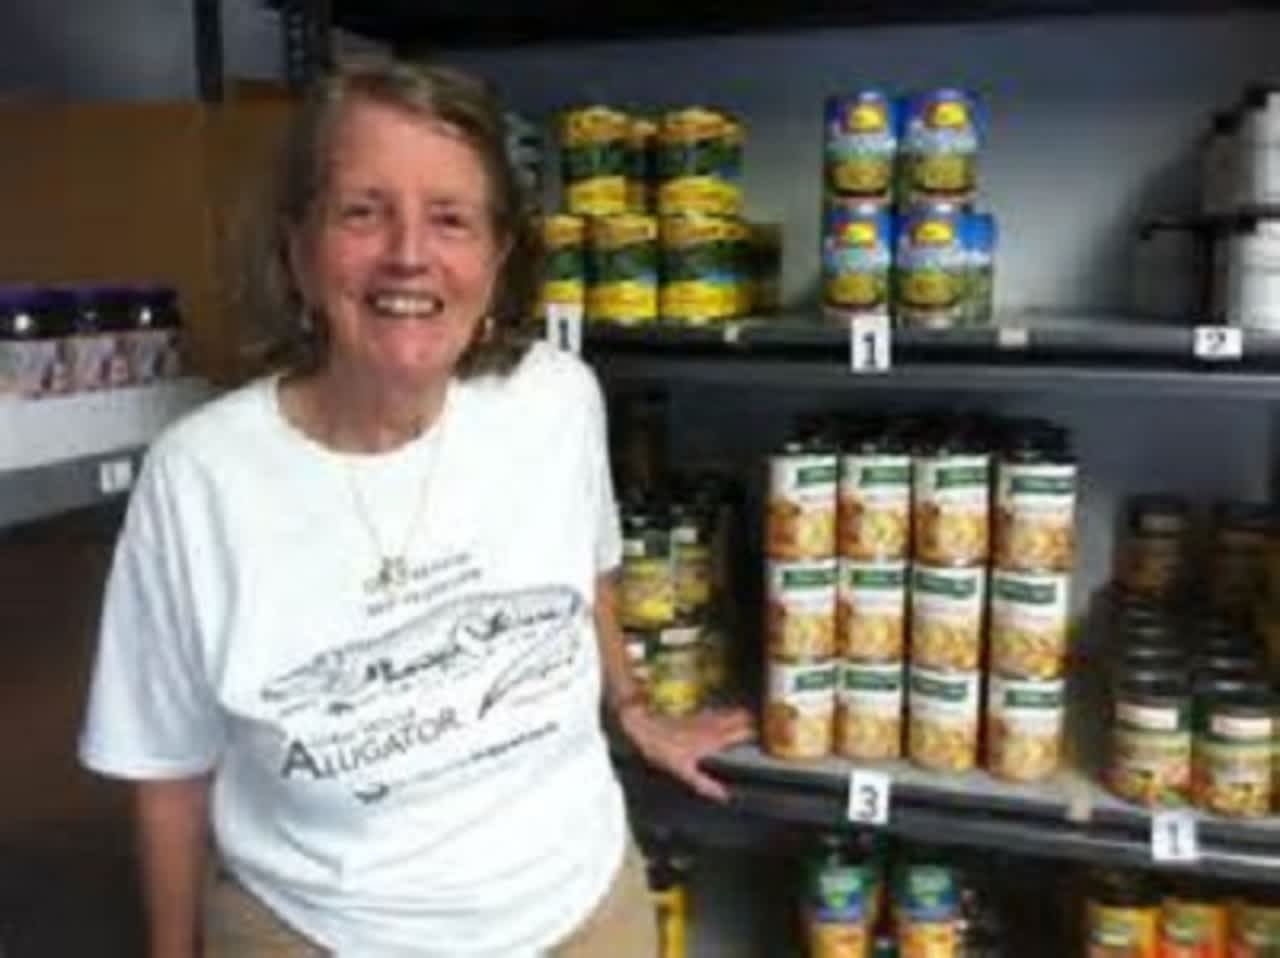 The Bethel Food Pantry is one of the busiest Social Services programs in the area.